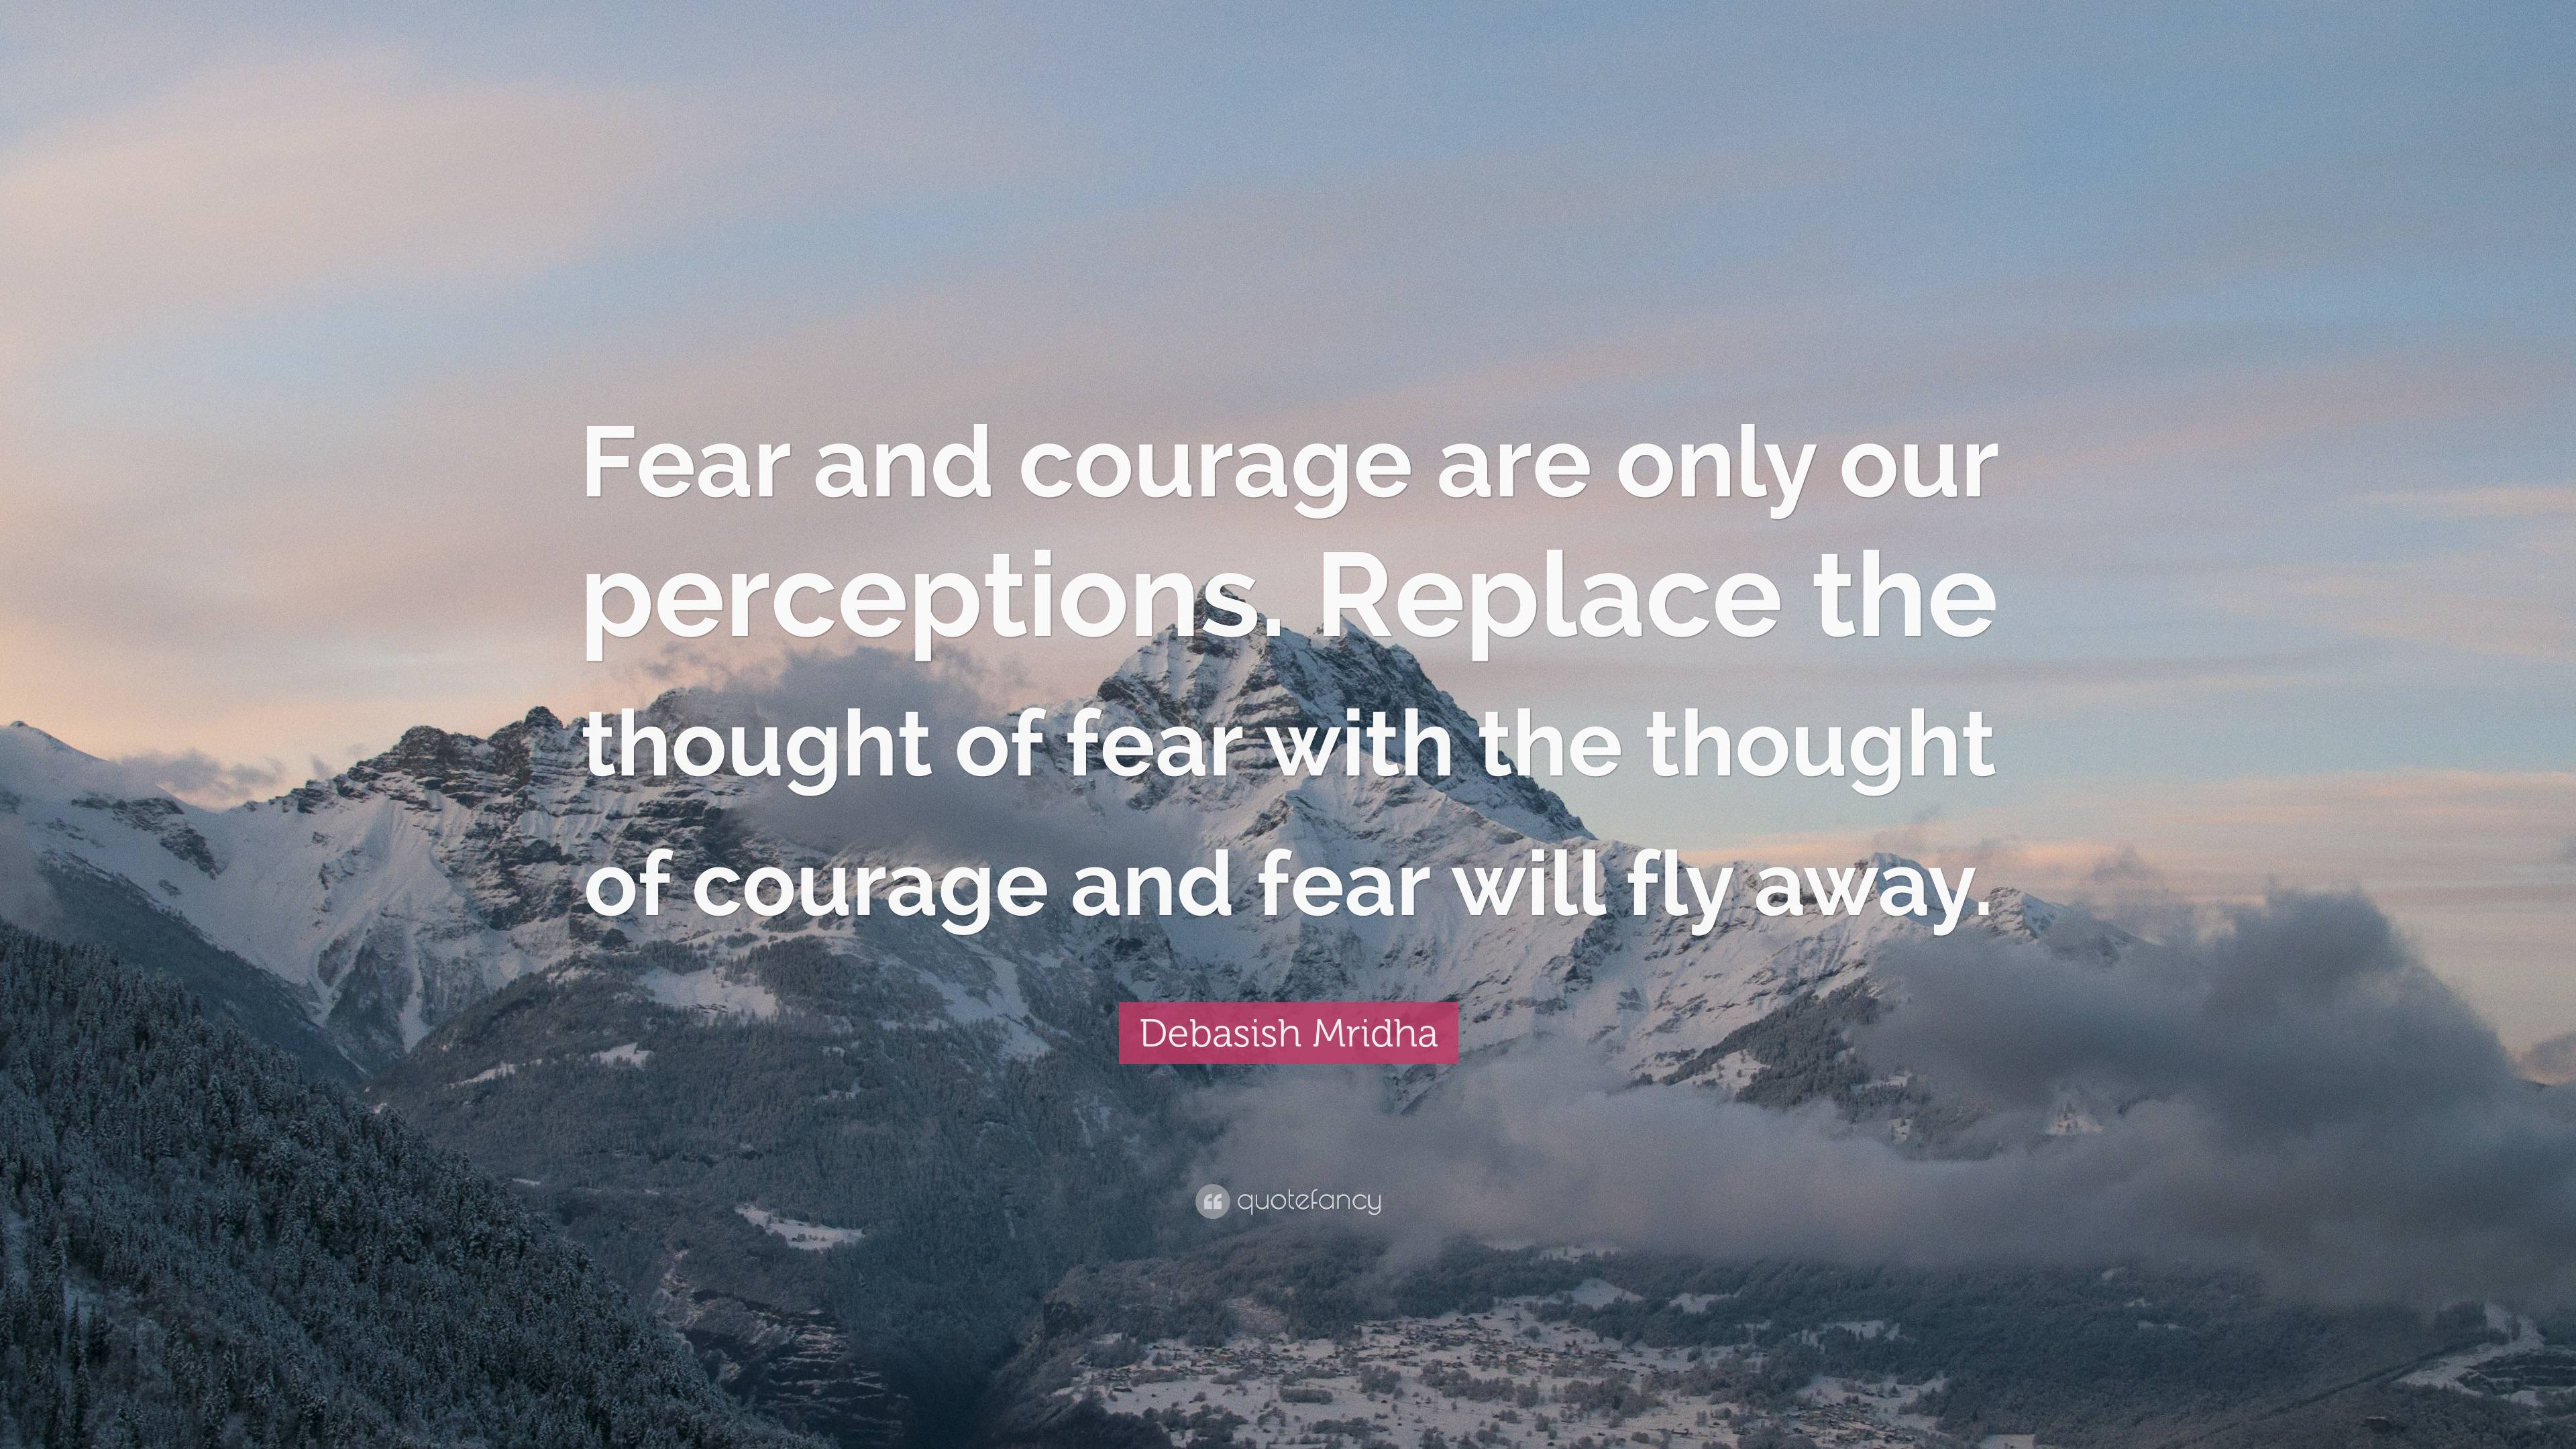 Debasish Mridha Quote: “Fear and courage are only our perceptions ...